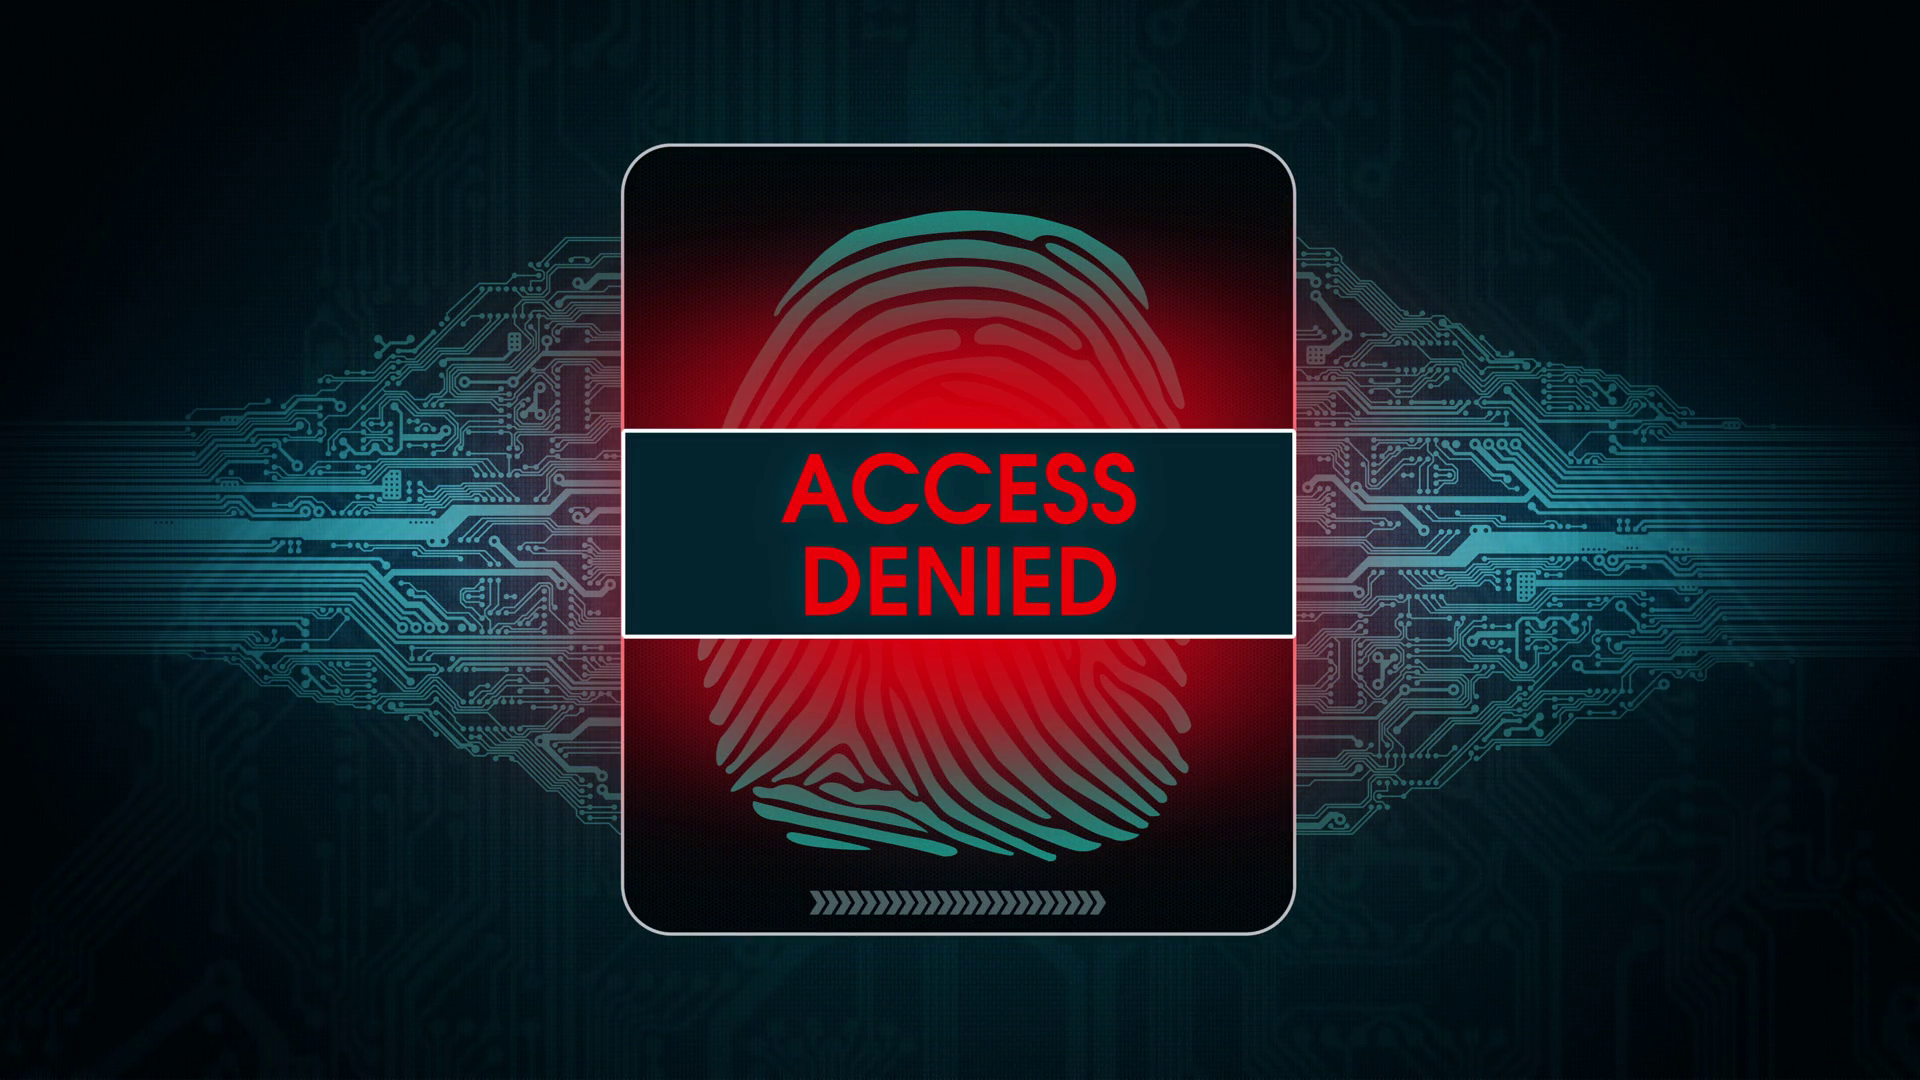 Access rejected. Access denied. Access is denied. Access denied Wallpaper. Blocked обои.